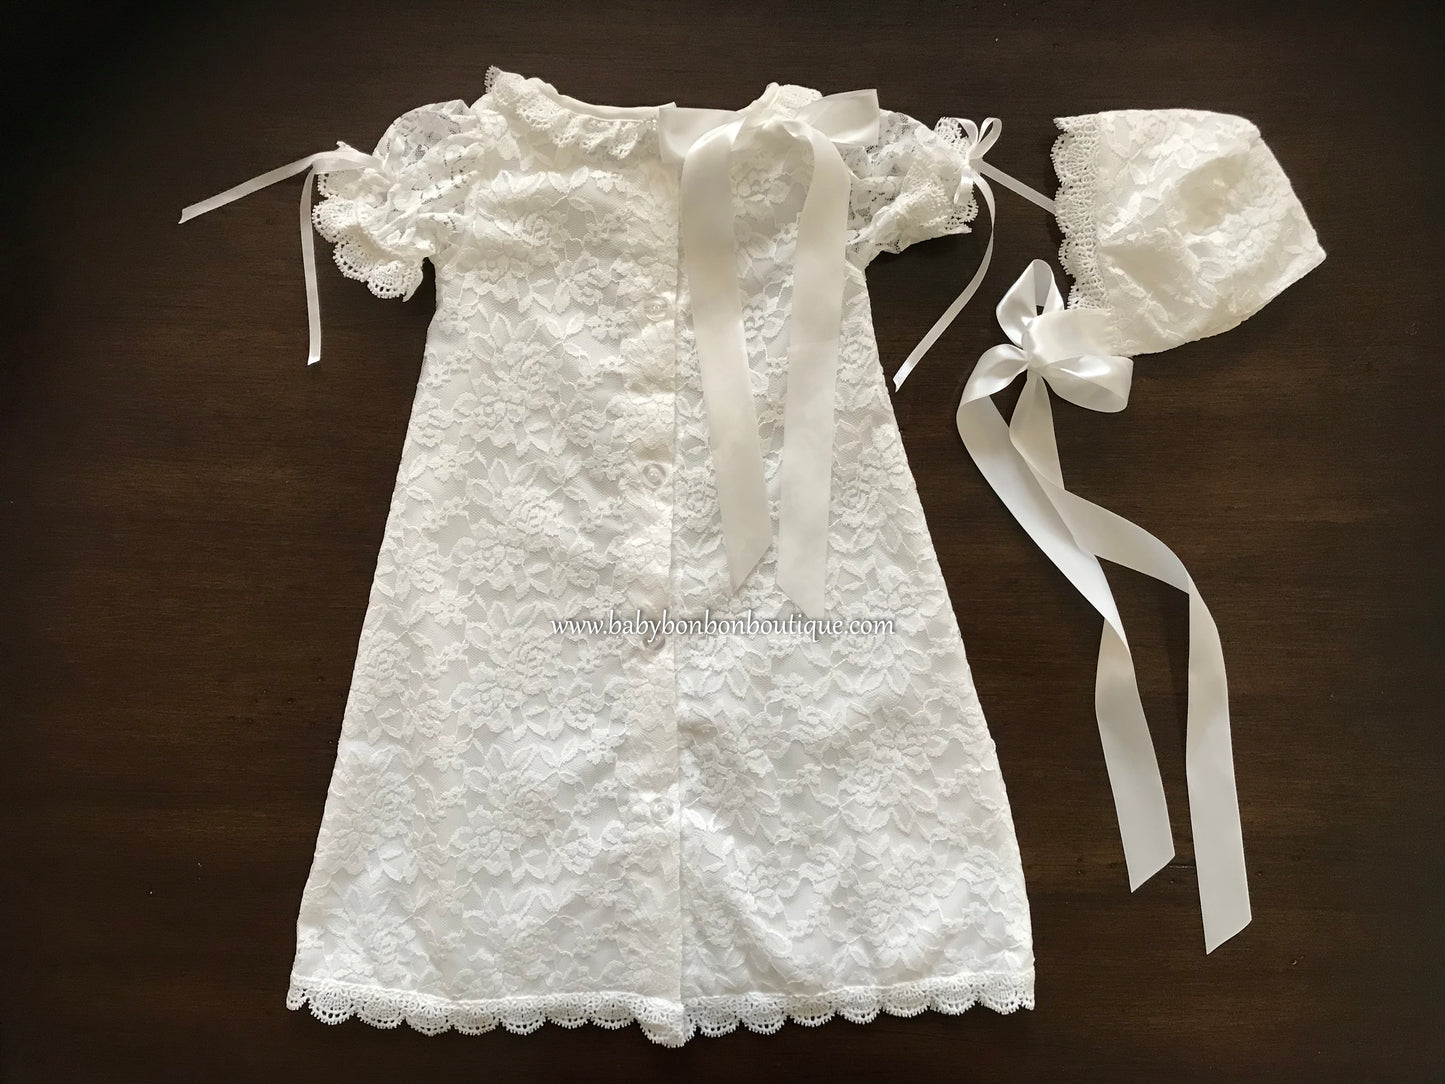 French White Lace Christening Dress and Bonnet, Belle Baptism Dress